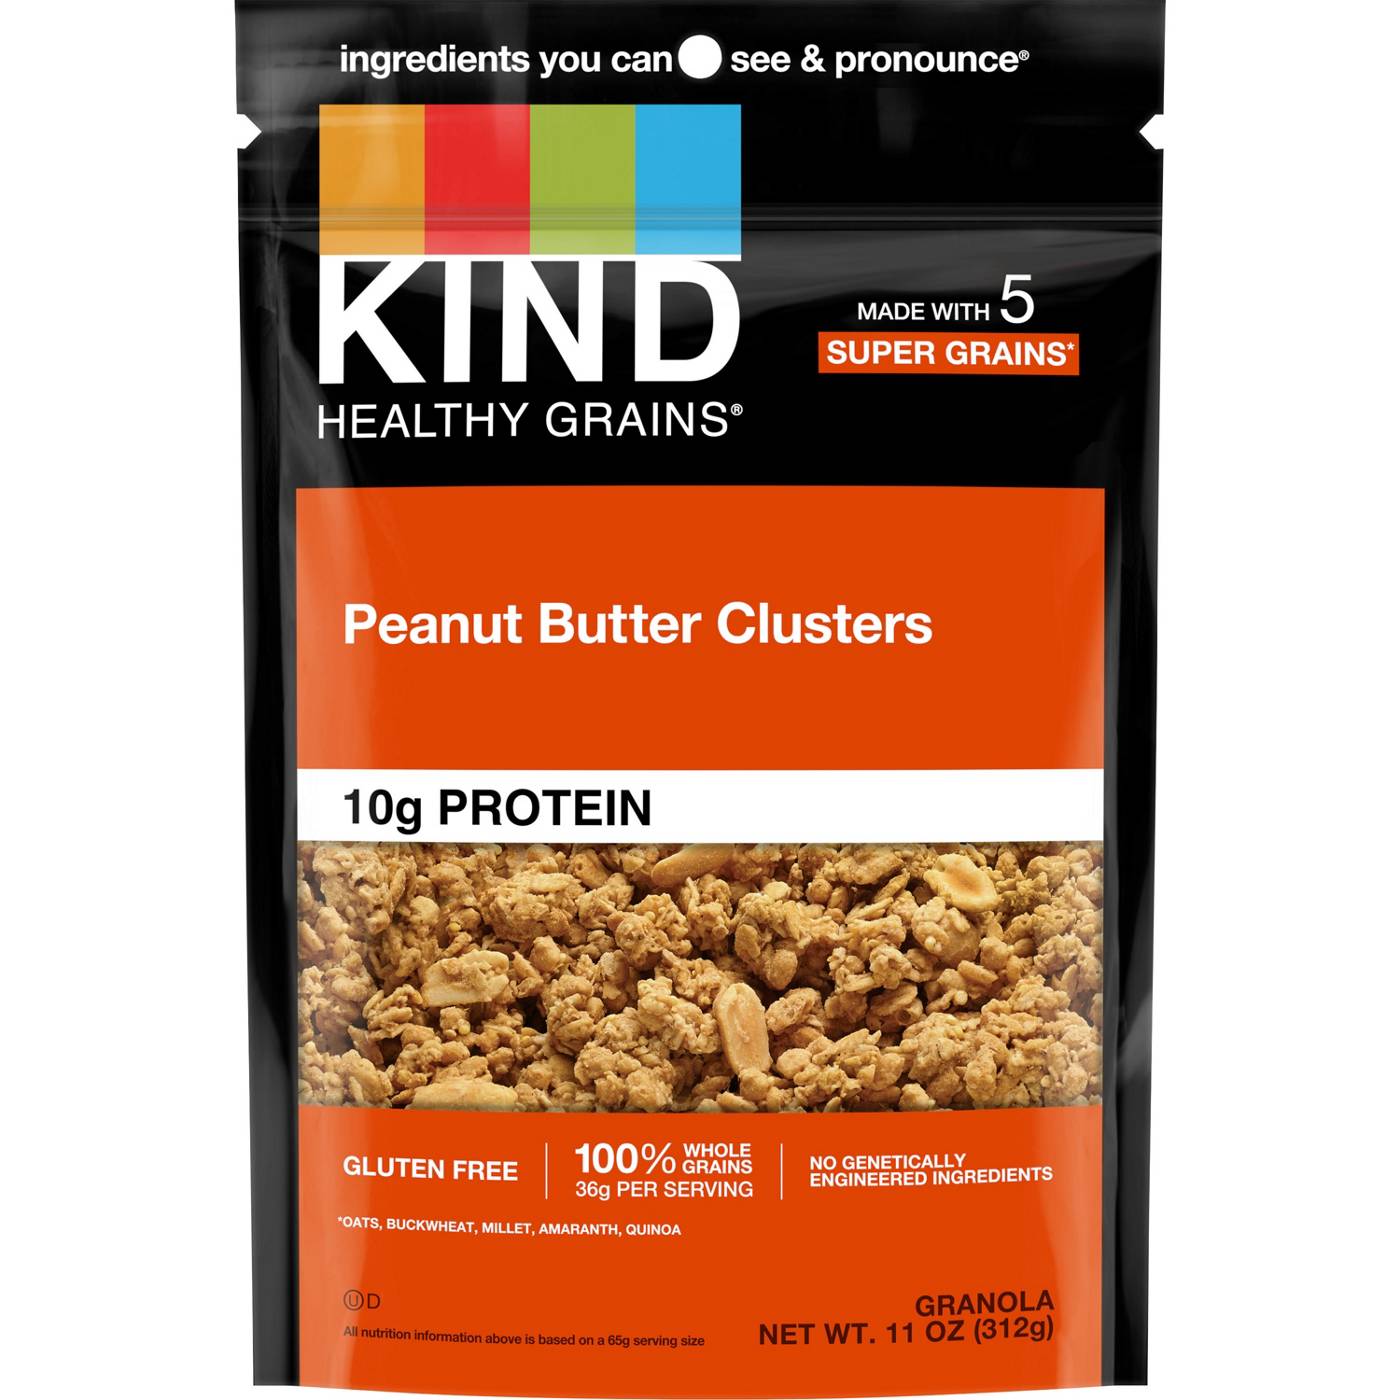 Kind Healthy Grains Granola - Peanut Butter Clusters; image 1 of 3